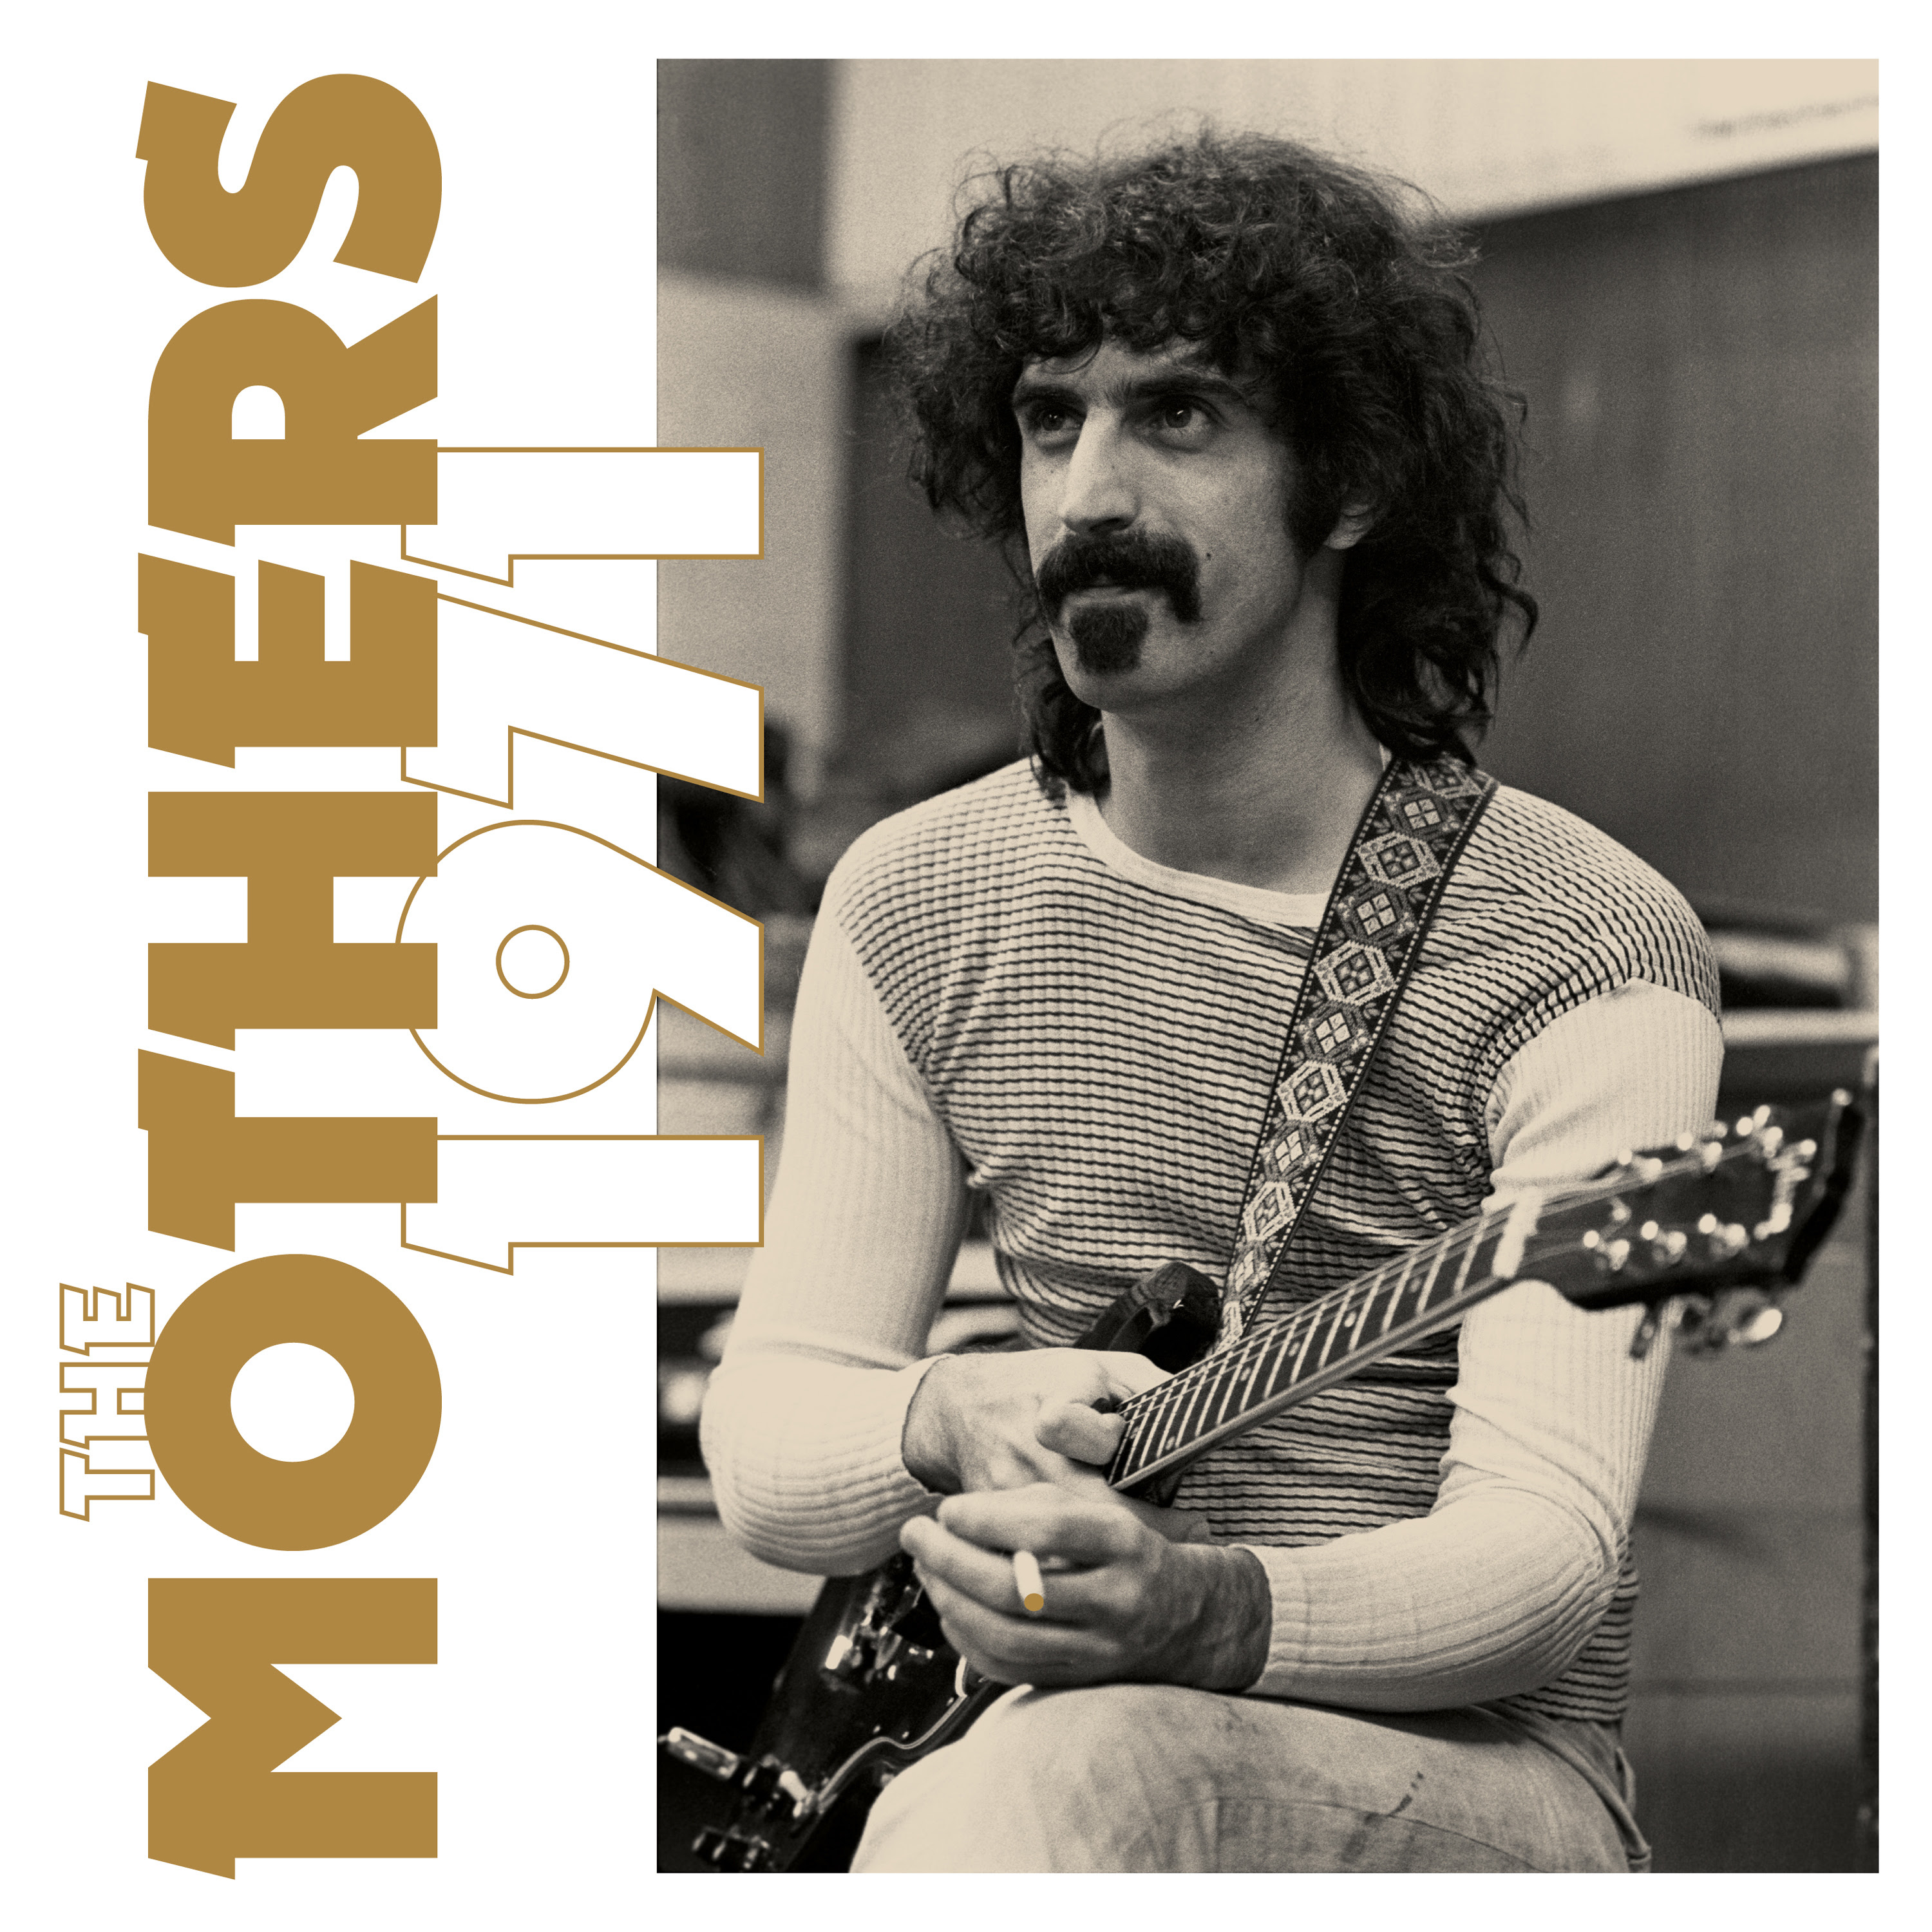 Frank Zappa's Legendary 1971 Fillmore East Run and Shocking Final Rainbow Theatre Gig With The Mothers Gets Proper 50th Anniversary Commemoration With Definitive 8-Disc Boxed Set, "The Mothers 1971"